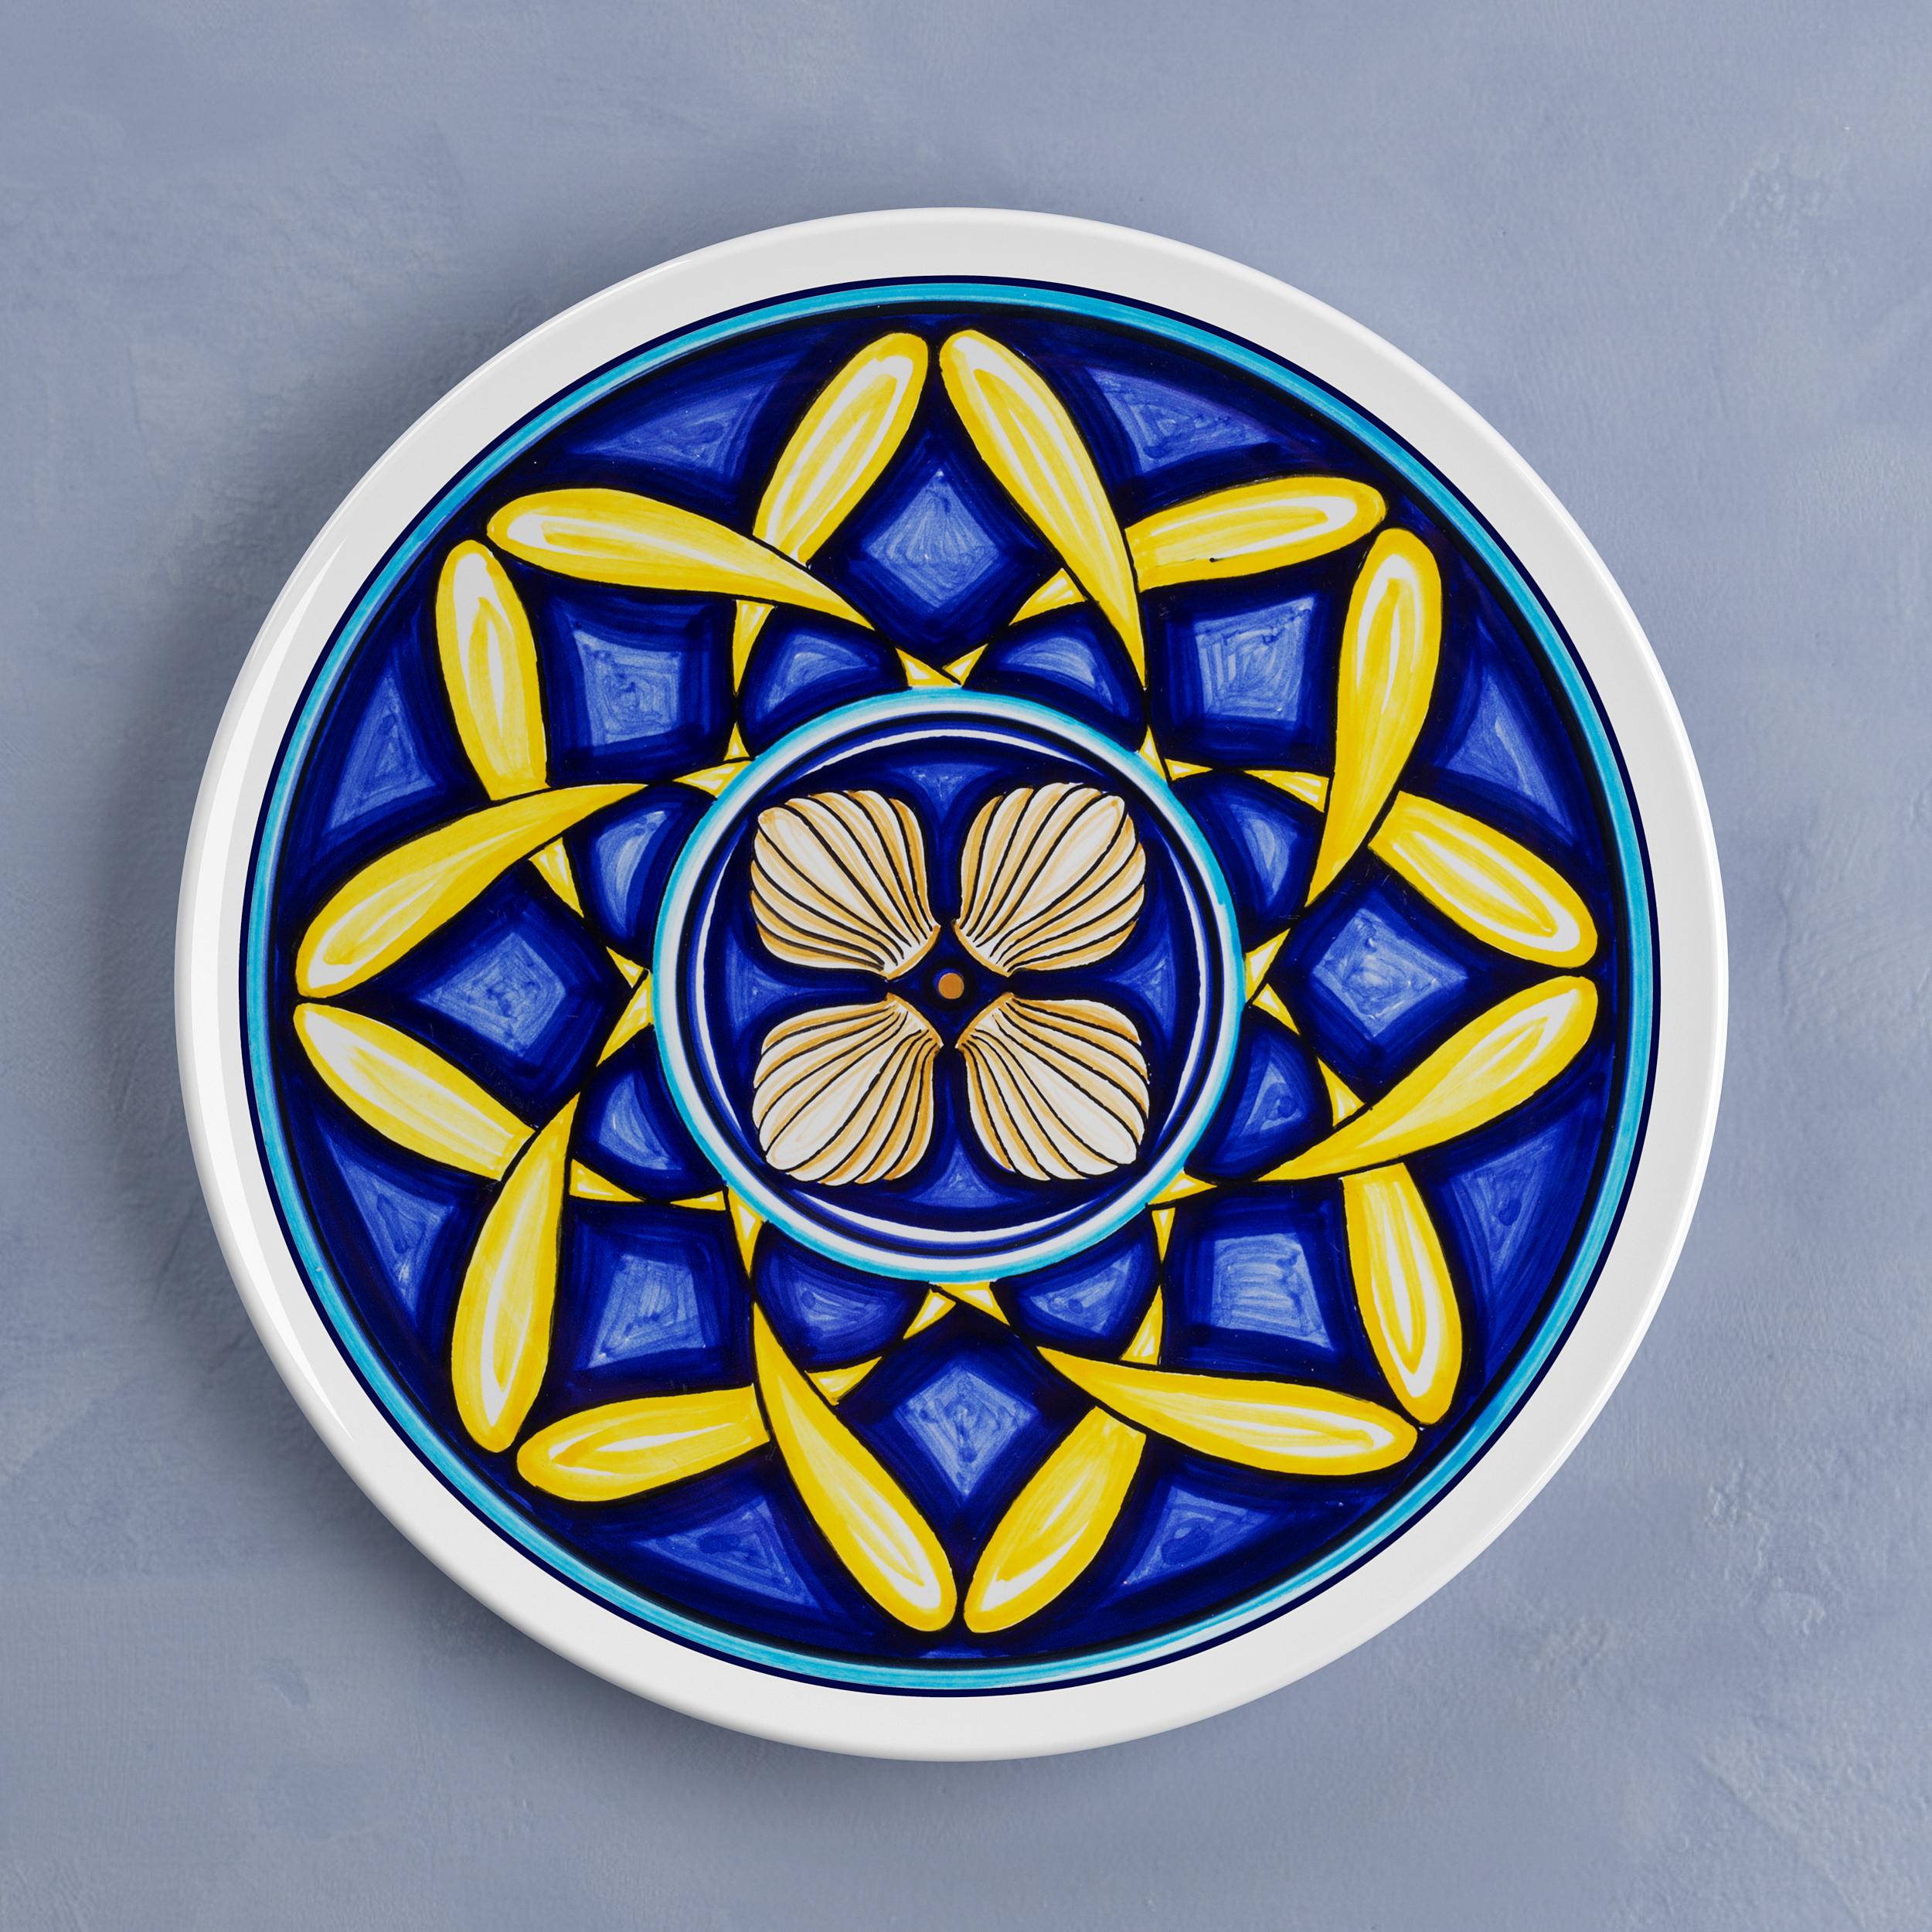 Beautiful set of 9 Sicilian Clay Colapesce handcrafted dinner plates by Crisodora will make an elegant statement with sophisticated Art de la table for every occasion.

Hand-painted

Made in Sicily (Italy) by Master Artisans.